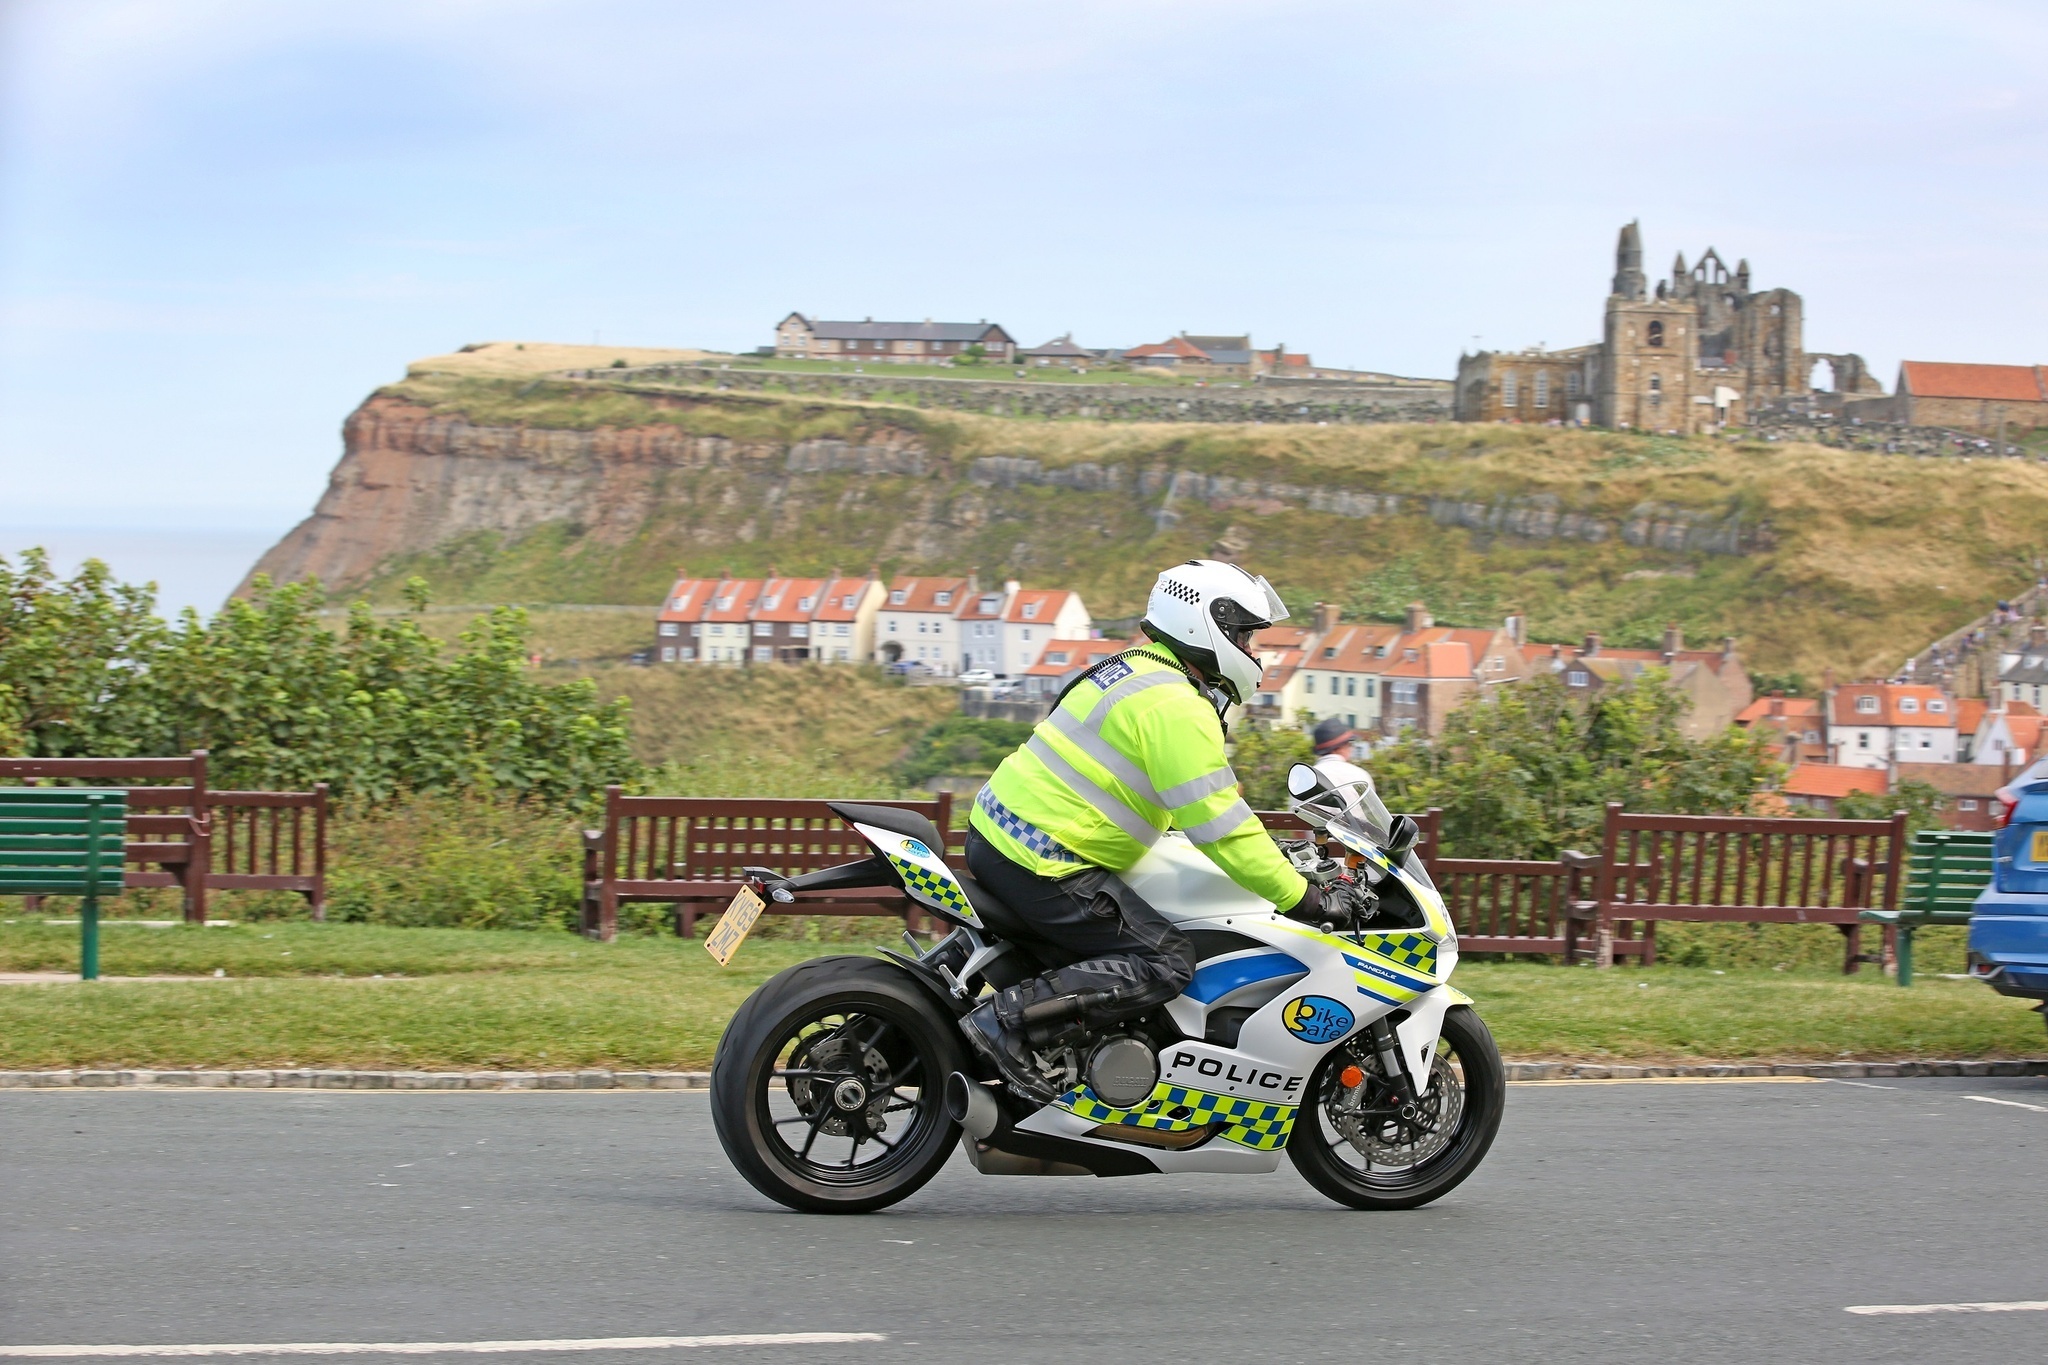 North Yorkshire police road safety focus on motorcyclists